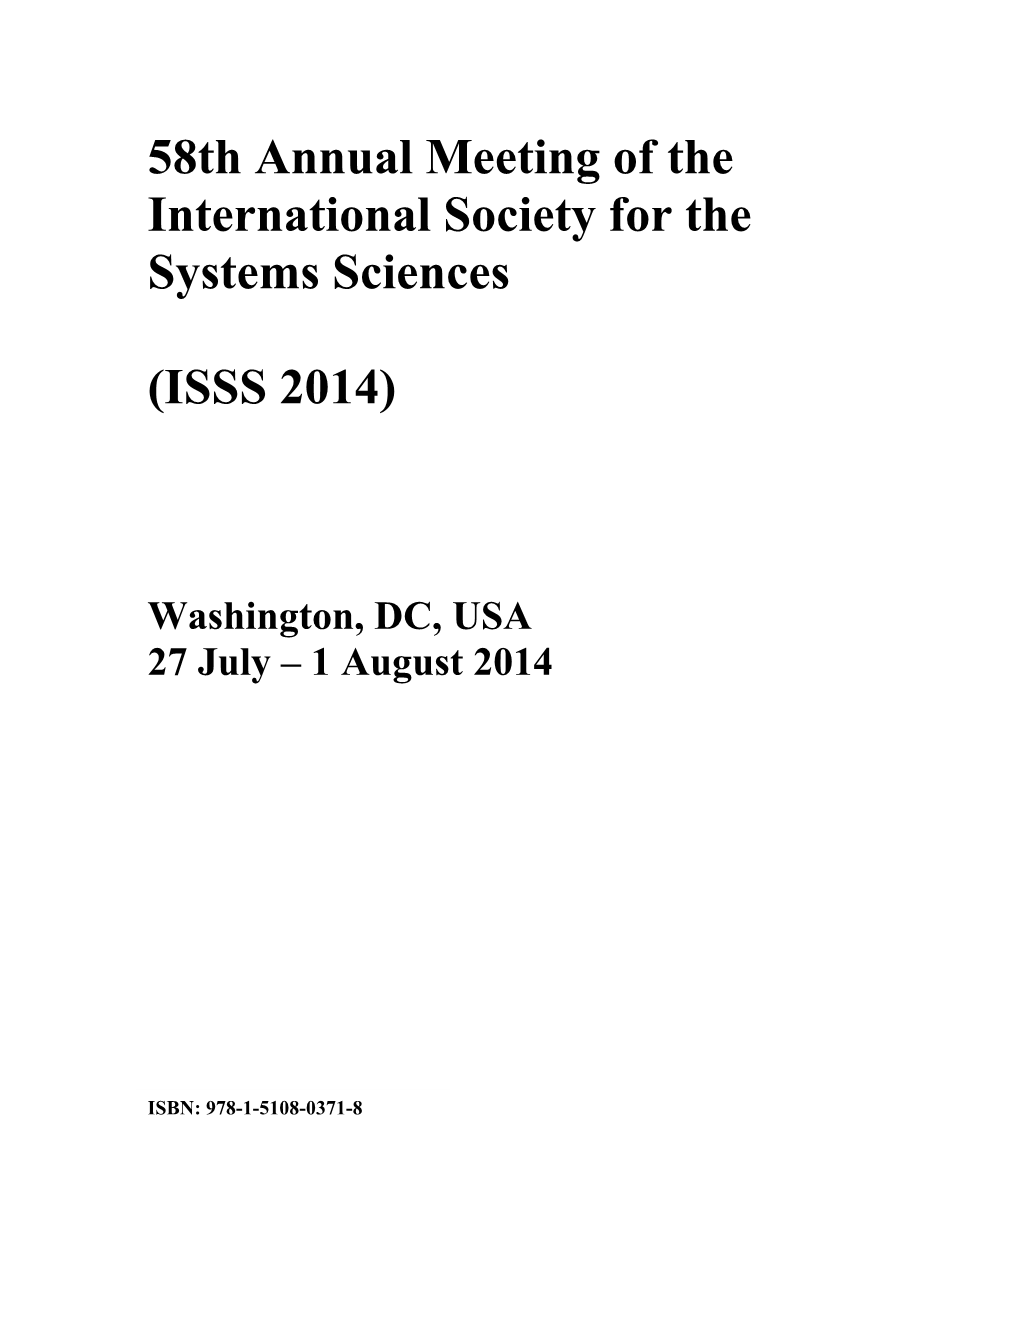 58Th Annual Meeting of the International Society for the Systems Sciences